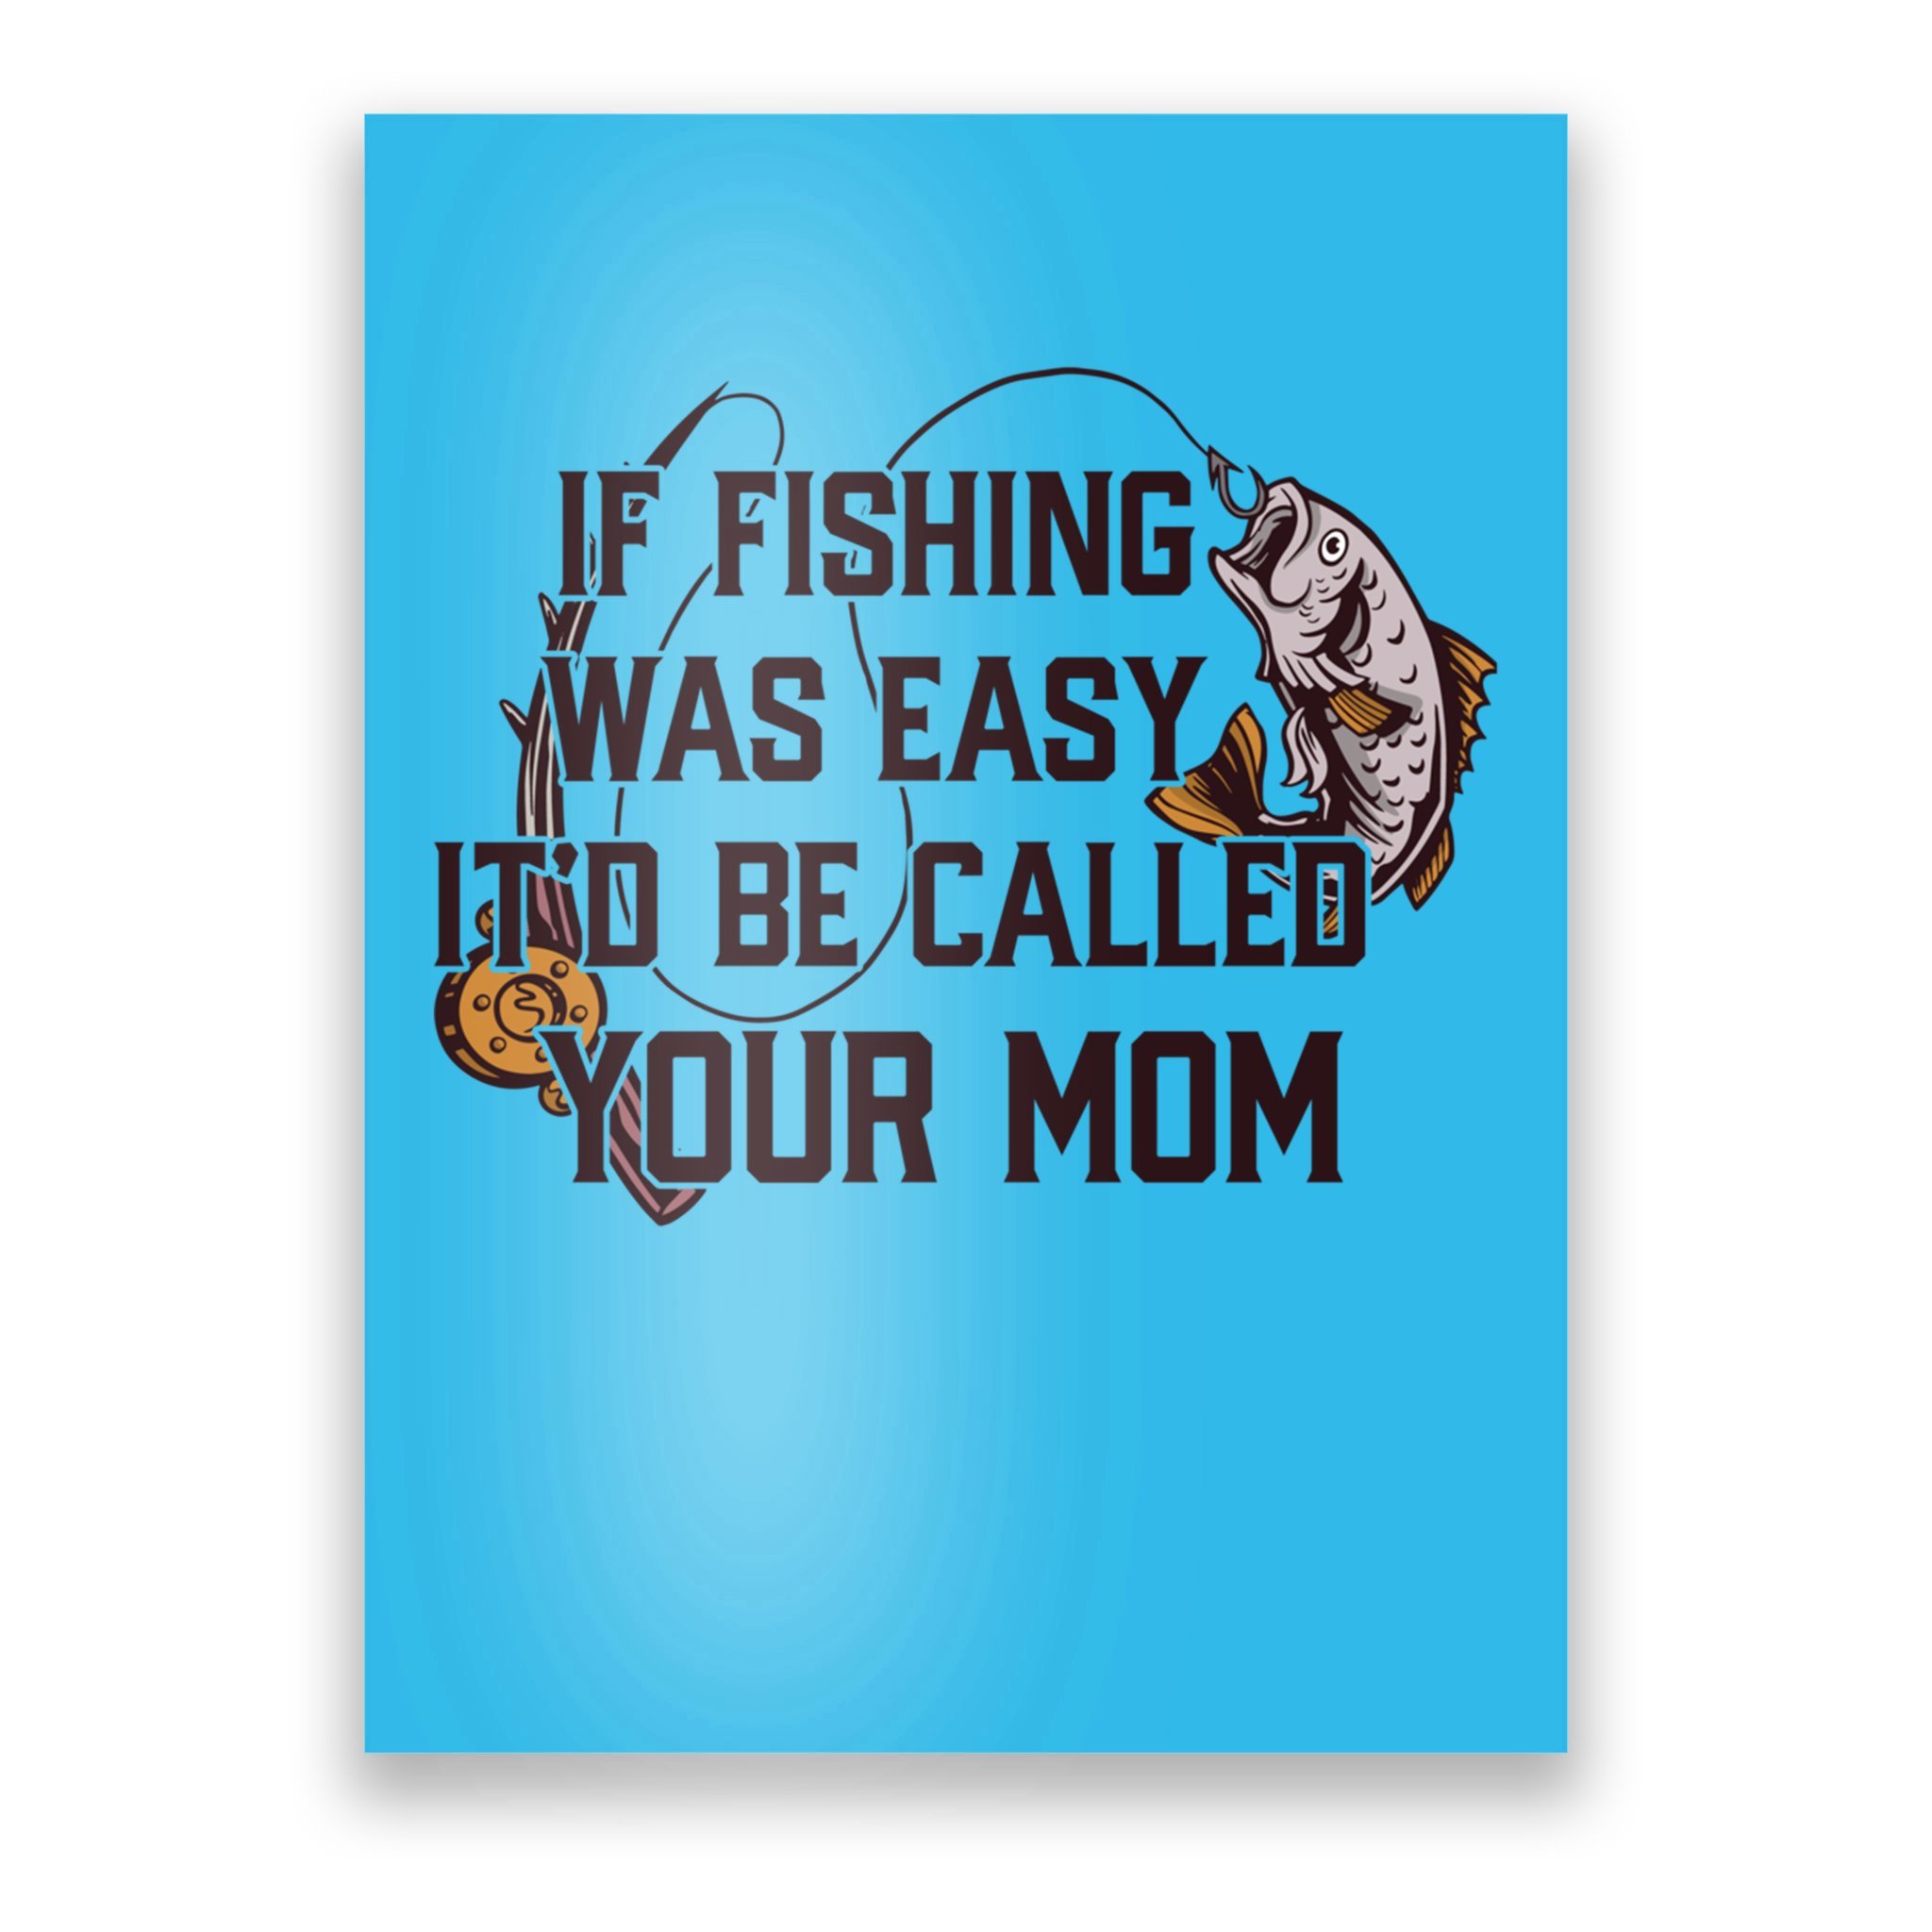 https://images3.teeshirtpalace.com/images/productImages/ifw2535019-if-fishing-was-easy-itd-be-called-your-mom-funny-fish-meme-gift--skyblue-post-garment.jpg